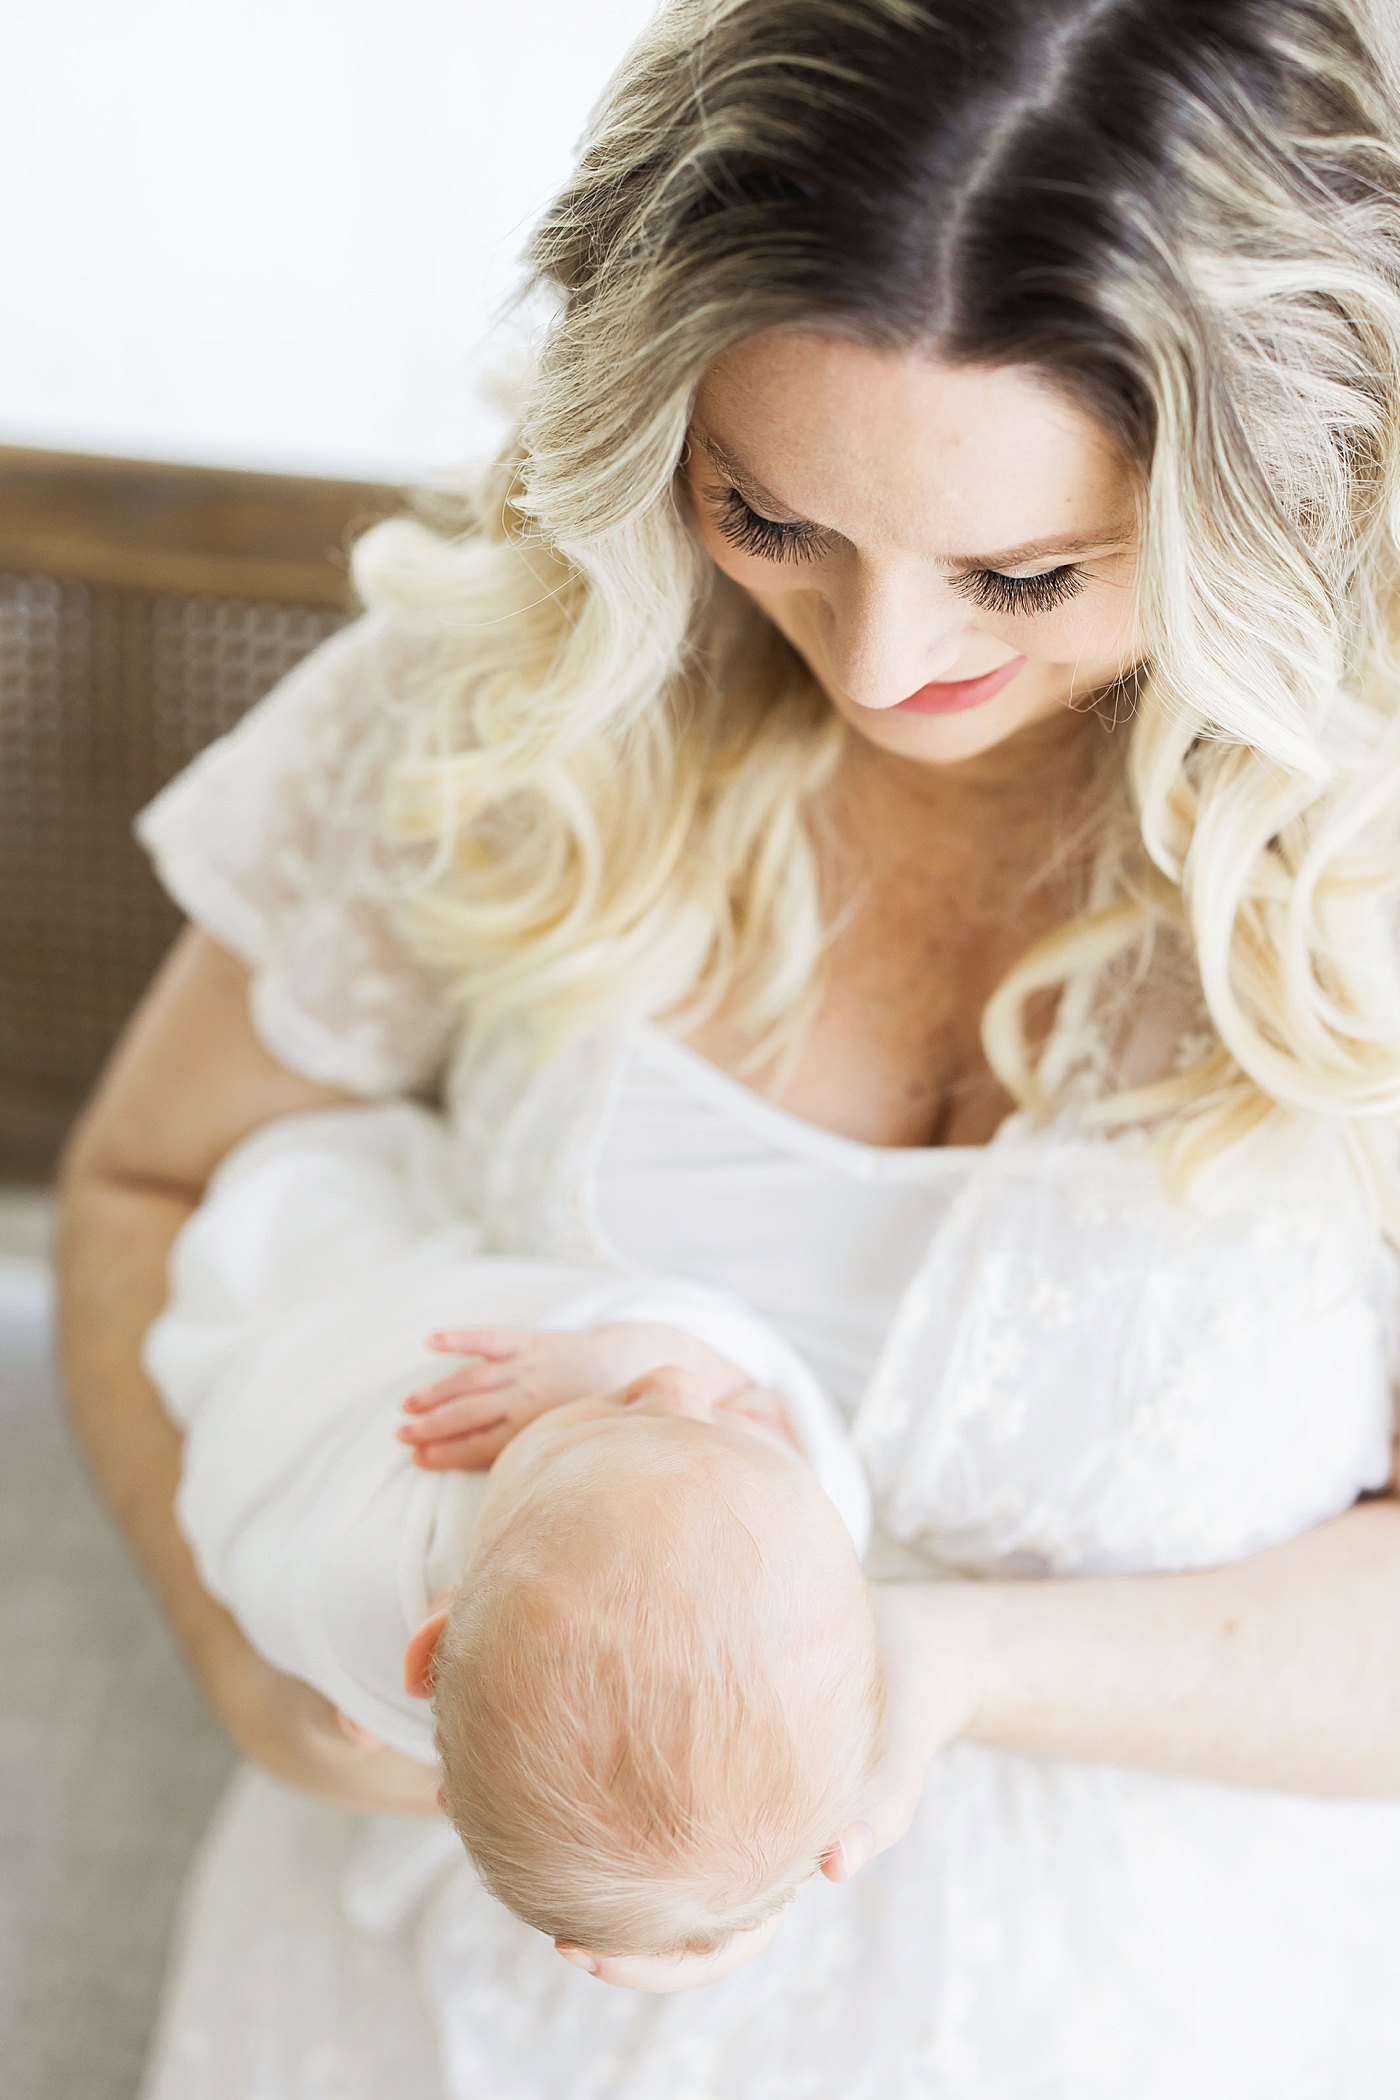 Mom holding her newborn son out in front of her, looking at him. Photo by Fresh Light Photography.